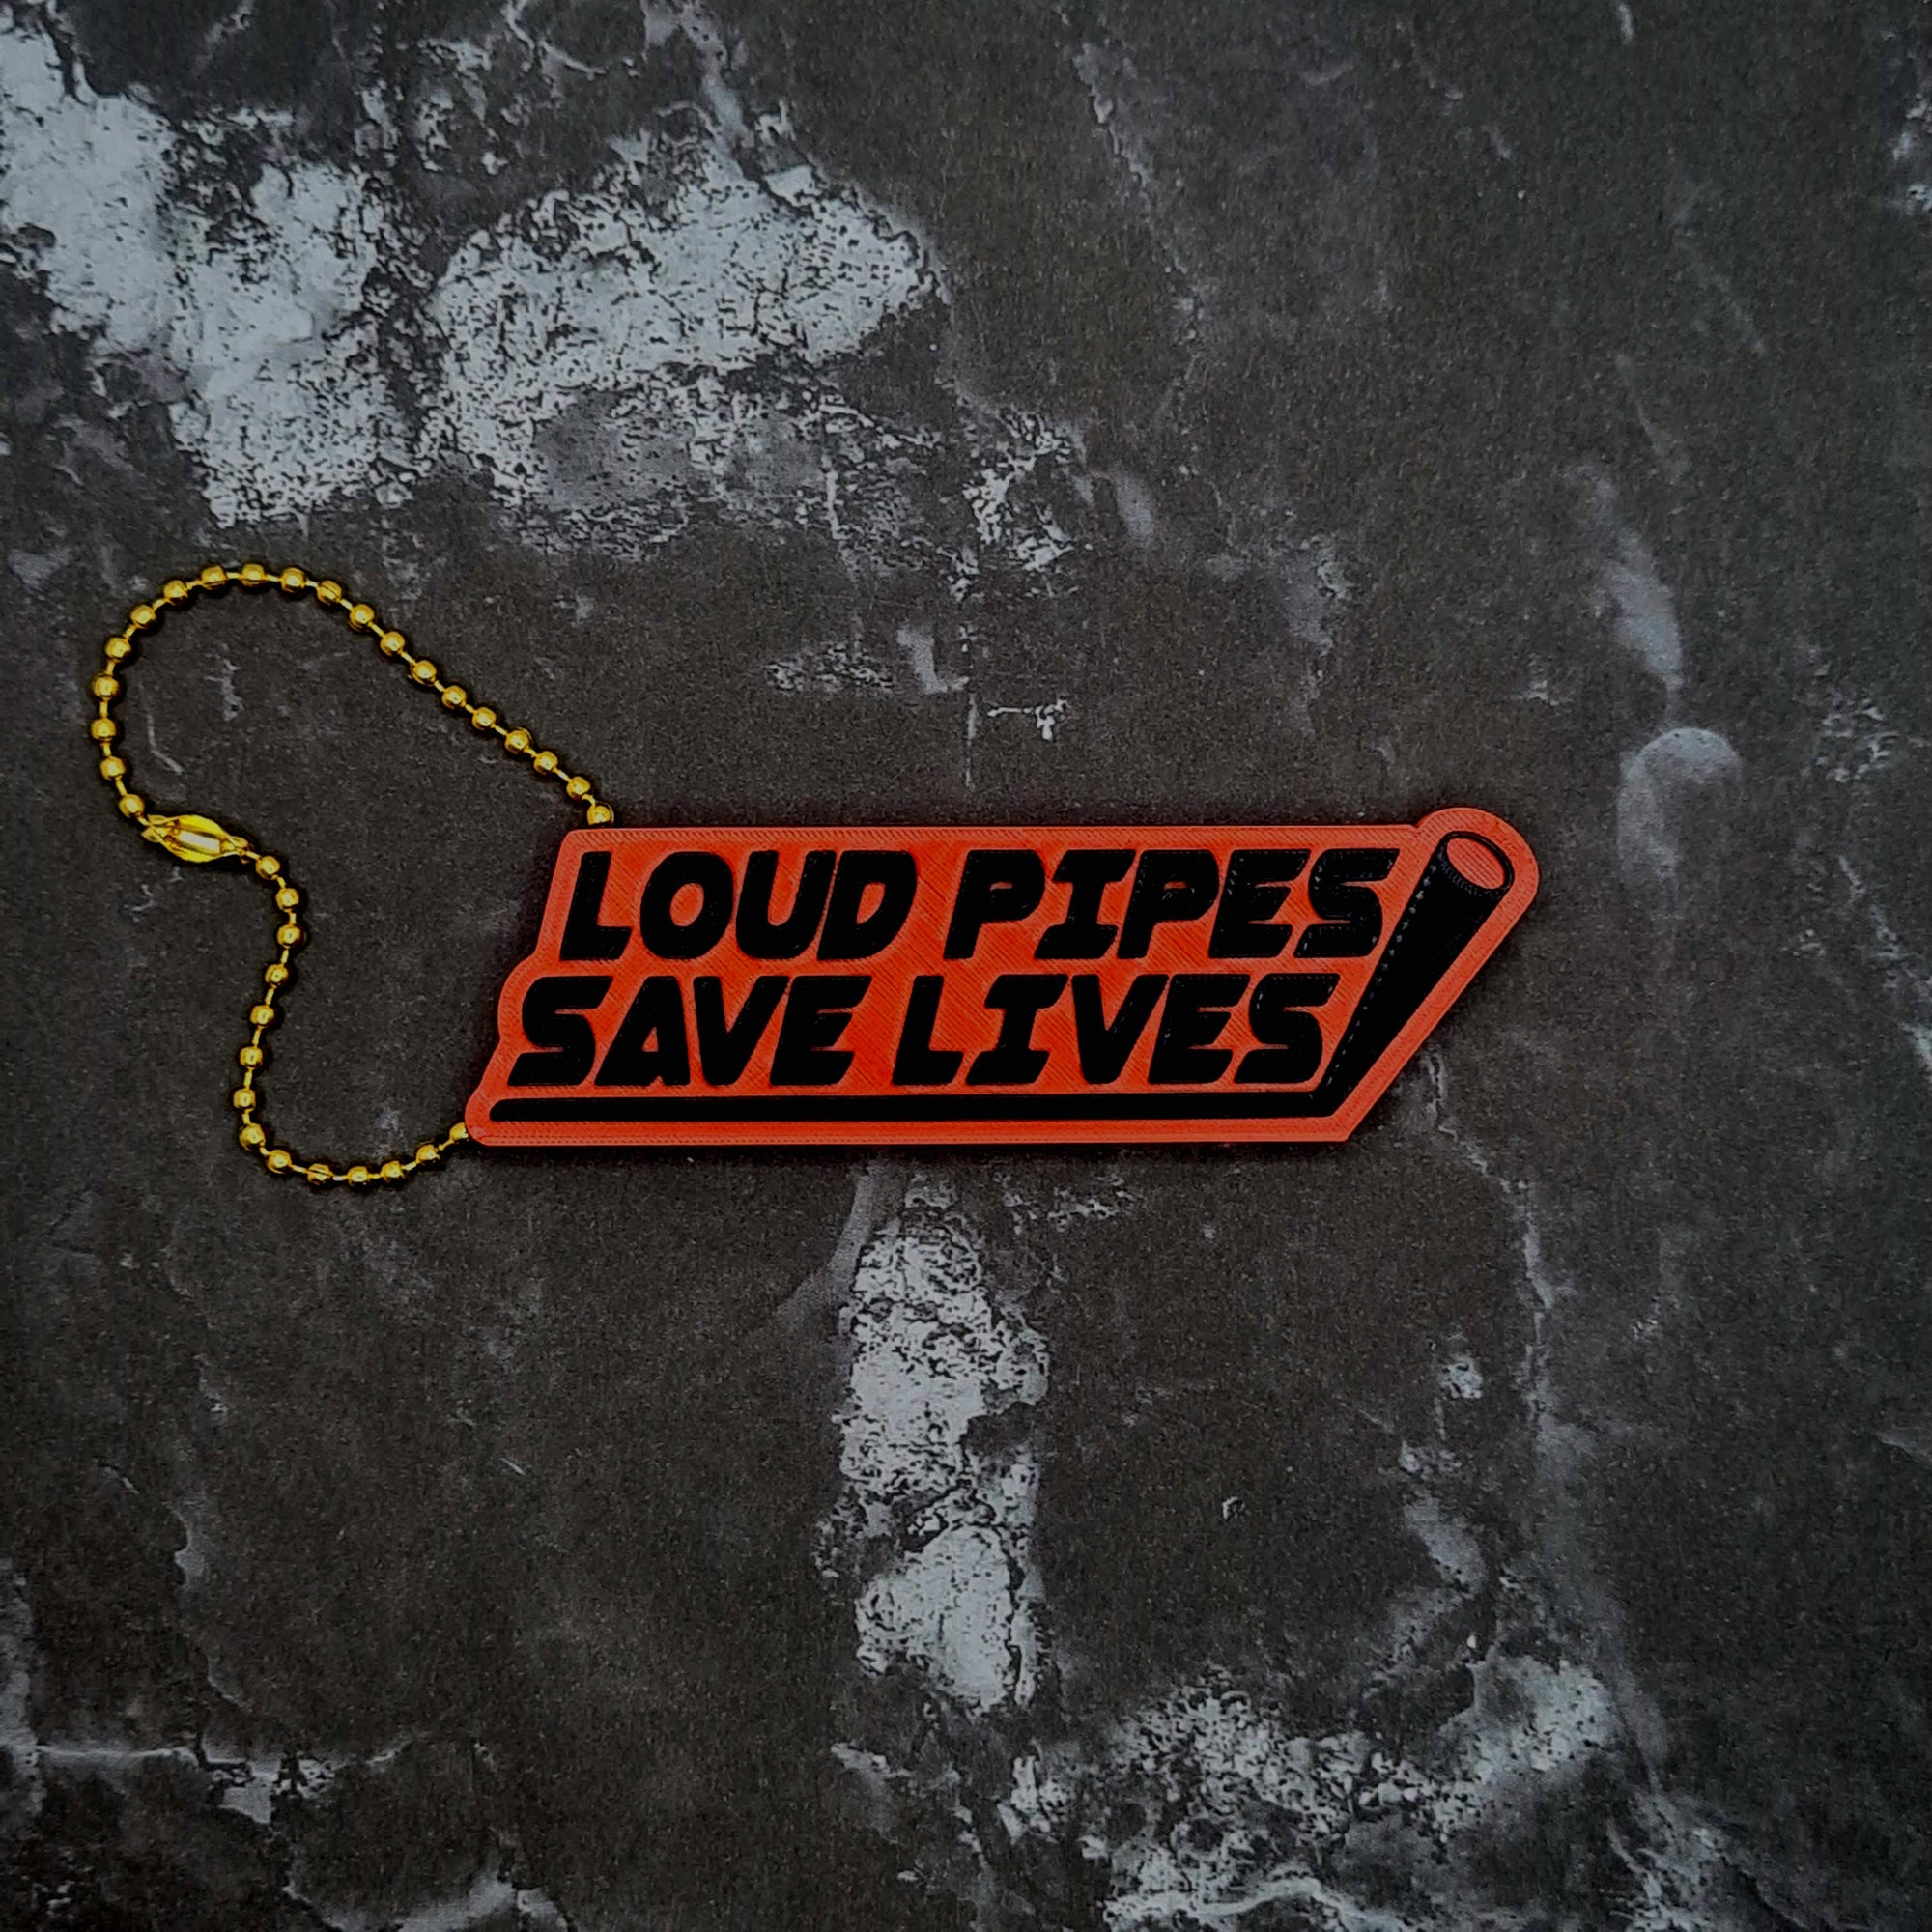 Loud Pipes Save Lives Keychain!